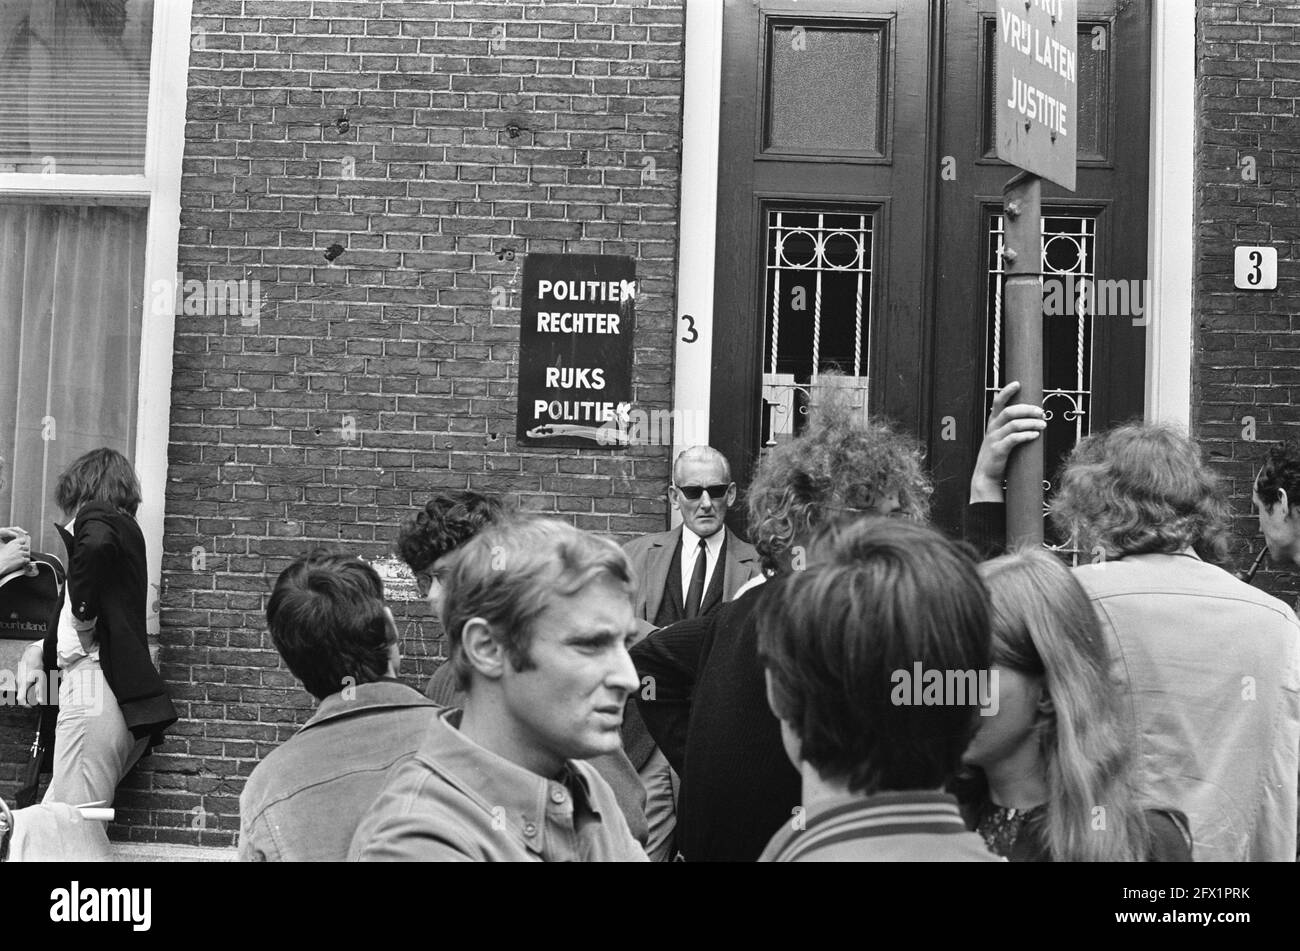 Artists protest against trial Maagdenhuis occupiers, Amsterdam, at Palace of Justice sign Political Judge, June 17, 1969, ARTISTSAARS, occupiers, signs, The Netherlands, 20th century press agency photo, news to remember, documentary, historic photography 1945-1990, visual stories, human history of the Twentieth Century, capturing moments in time Stock Photo